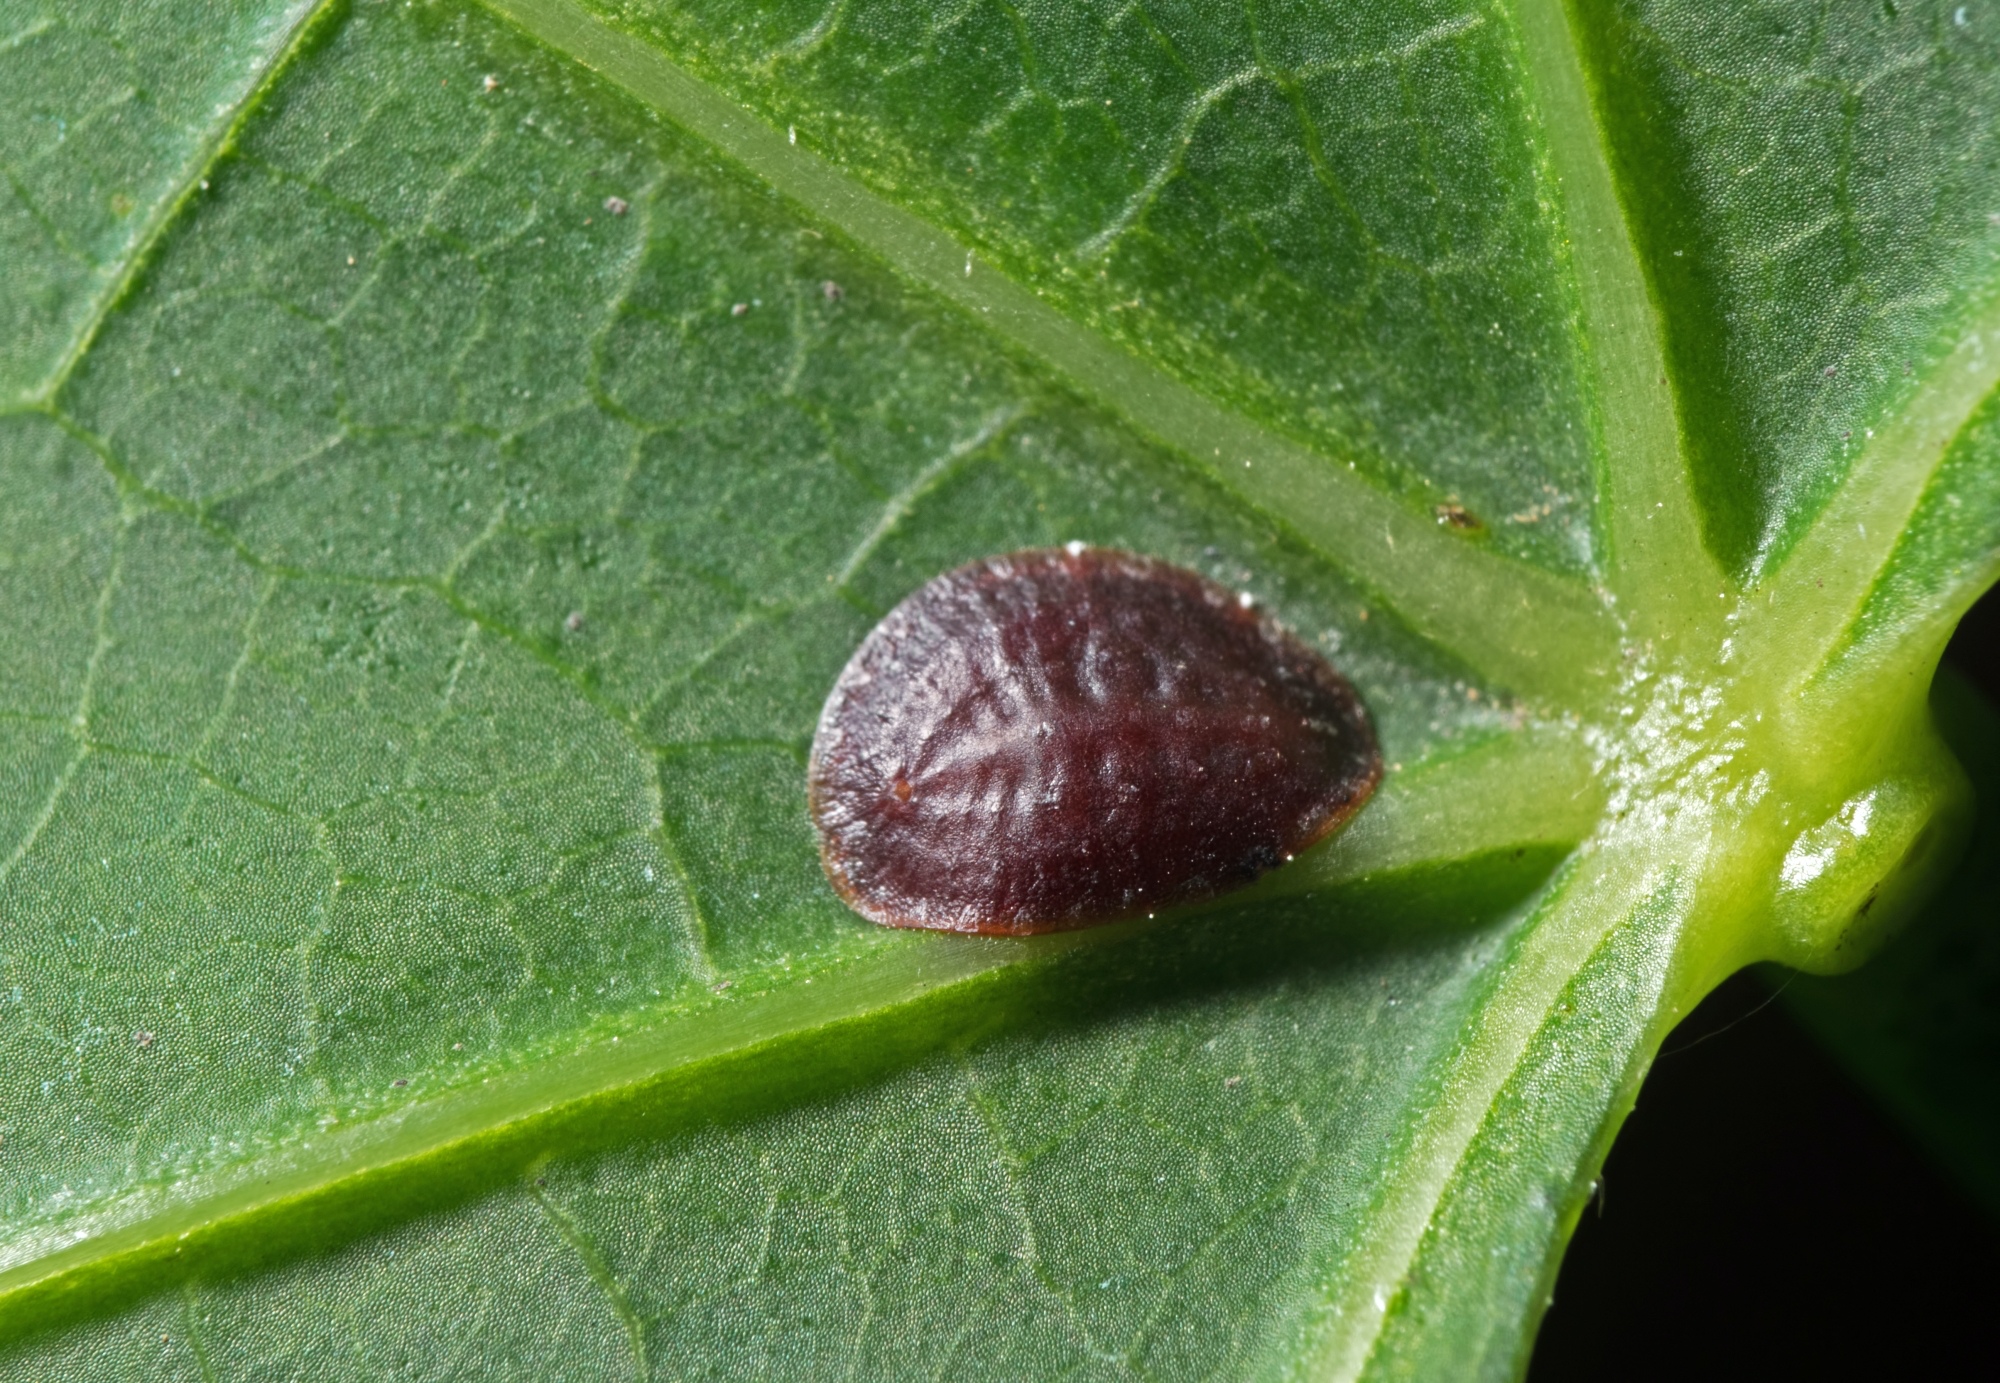 Scale insect pest on plant leaf. Photo by Cherchai Chaivimol/Shutterstock